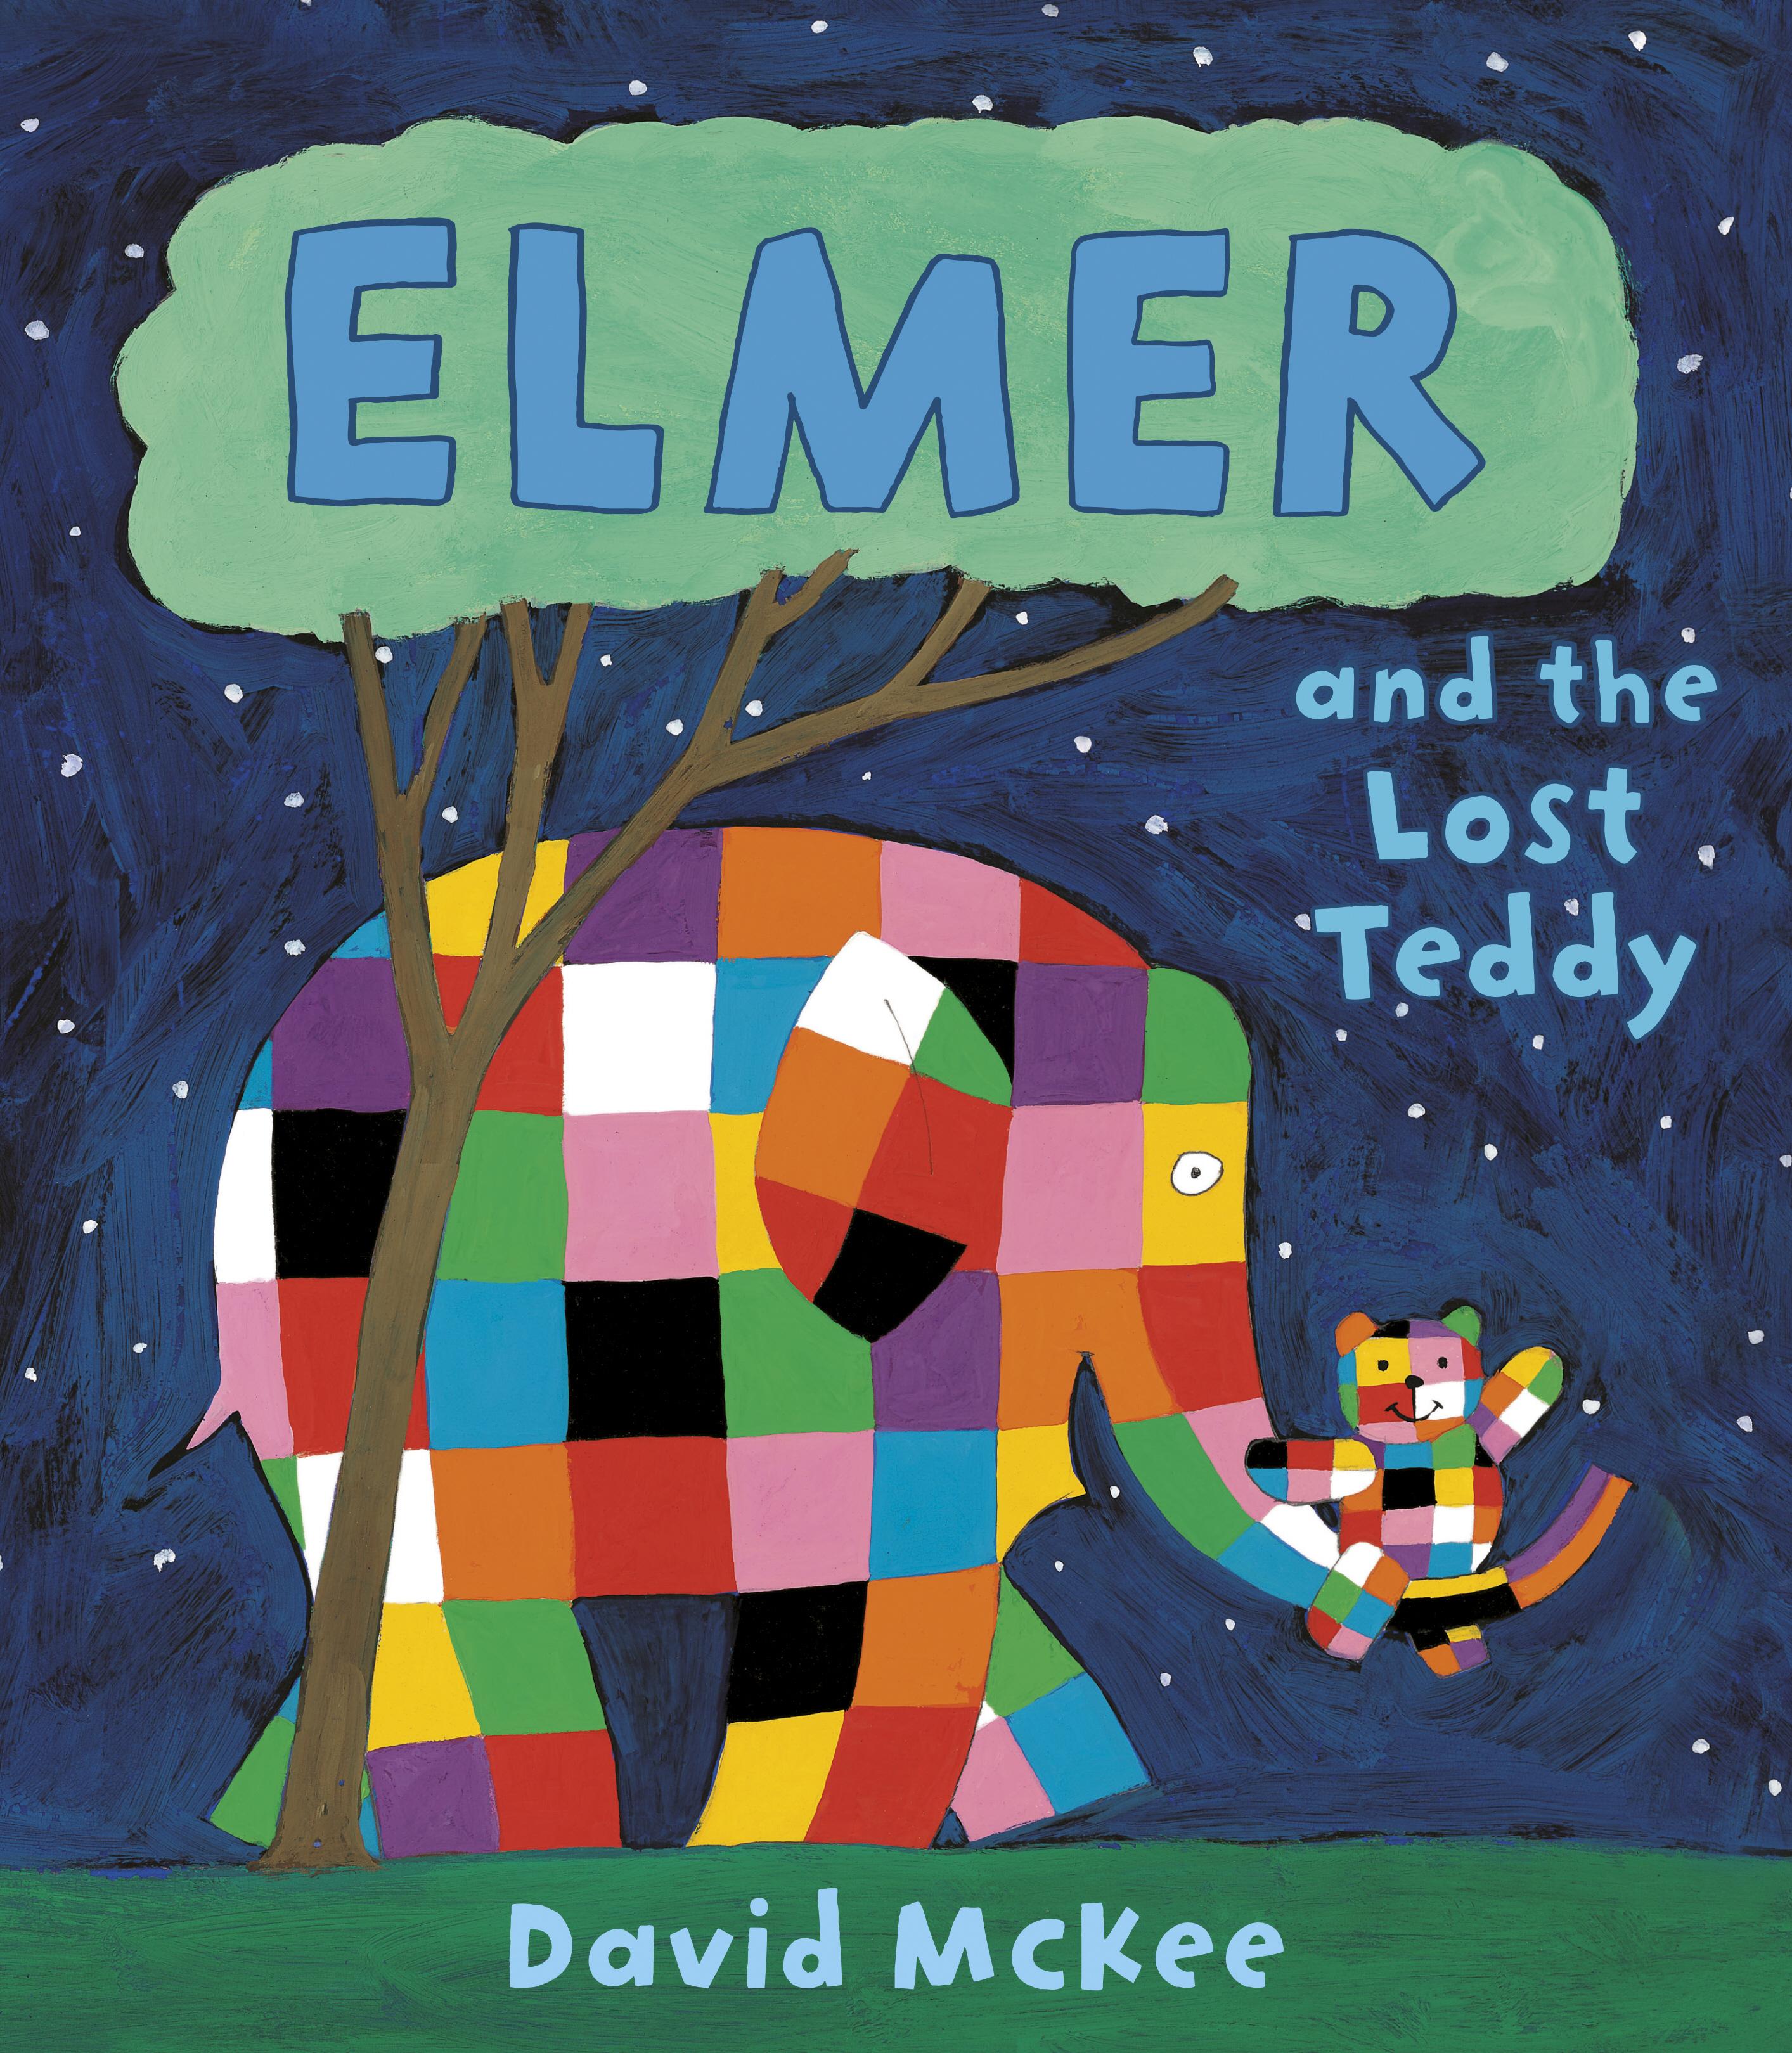 Elmer and the Lost Teddy - David Mckee